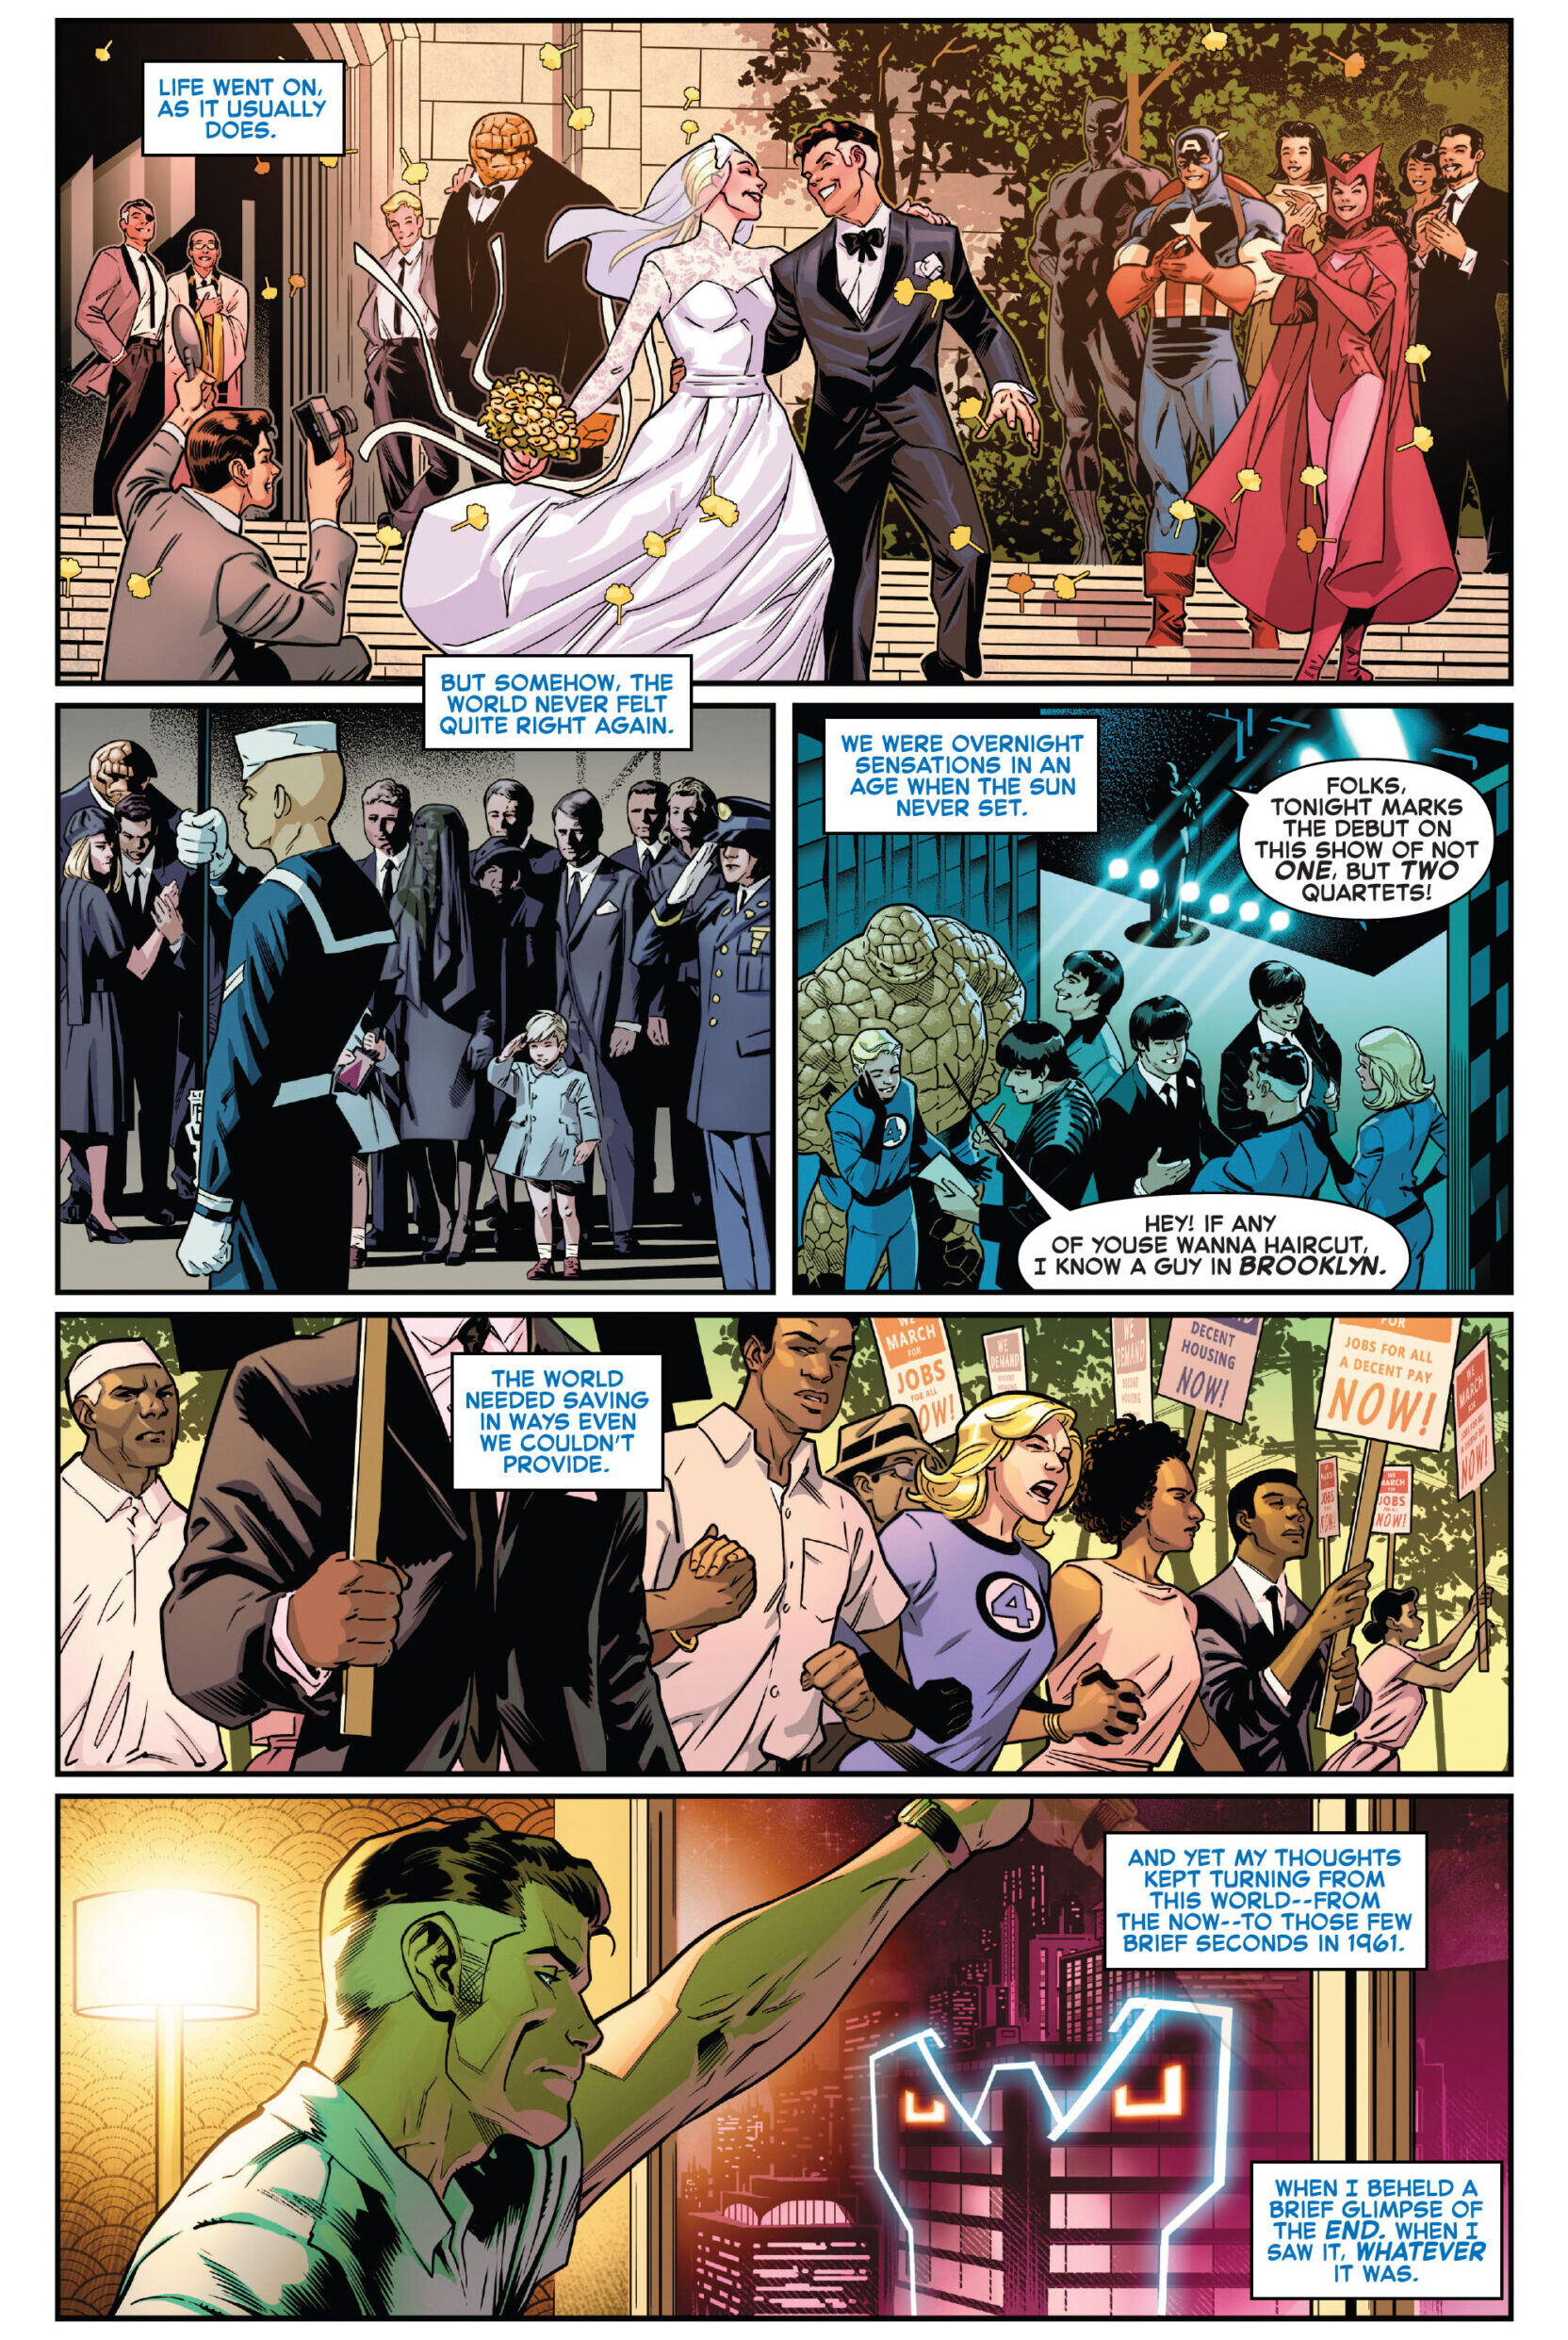 Sue Storm marches for Civil Rights via Fantastic Four: Life Story Vol. 1 #1 "The '60s" (2021), Marvel Comics. Words by Mark Russell, art by Sean Izaakse, Nolan Woodard, and Joe Caramagna.